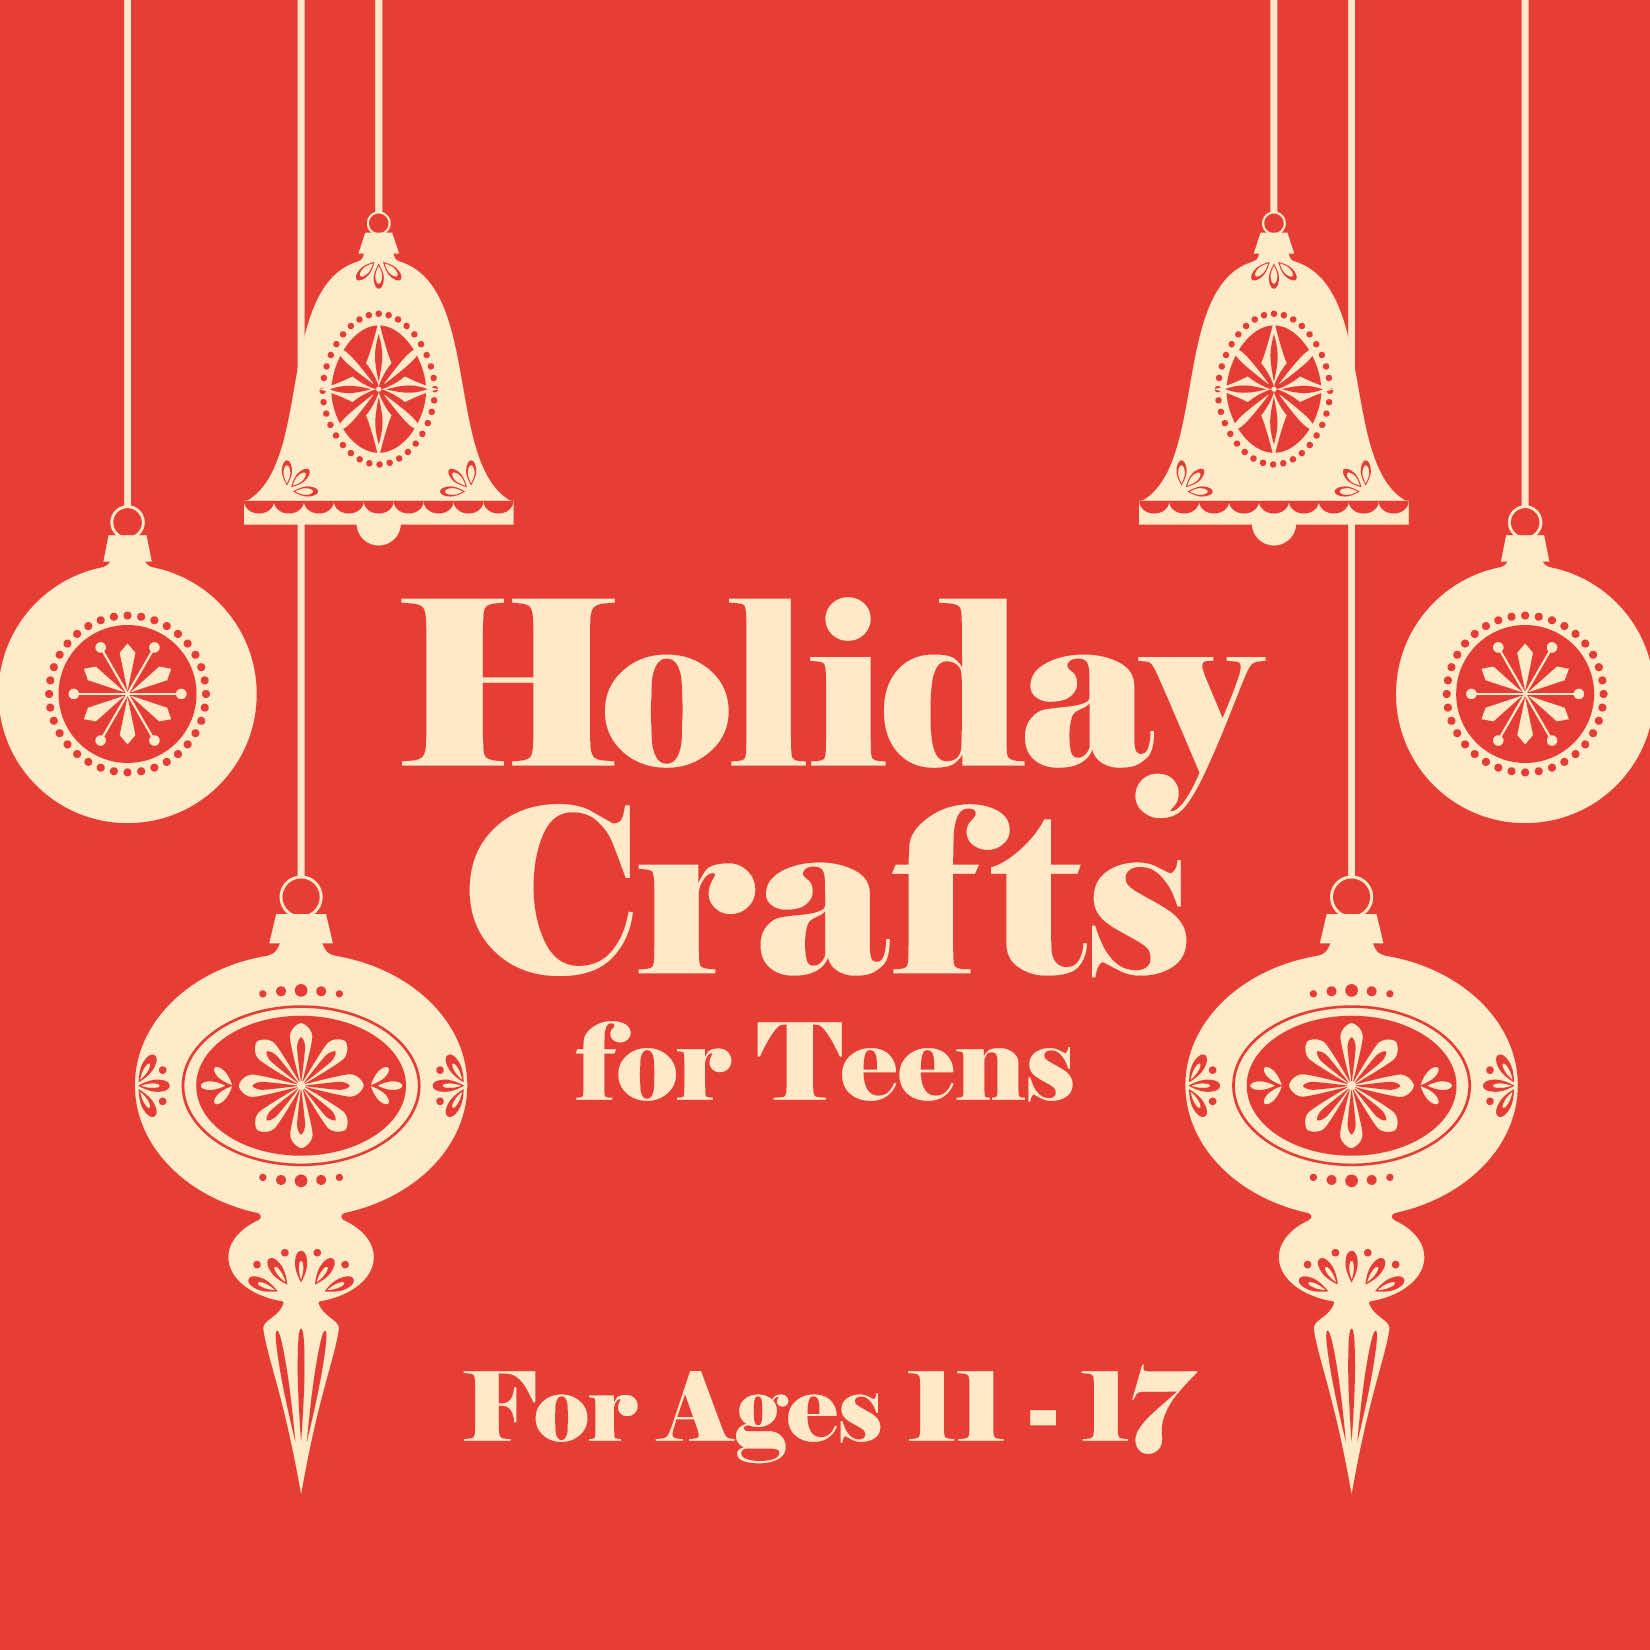 Holiday Crafts for Teens